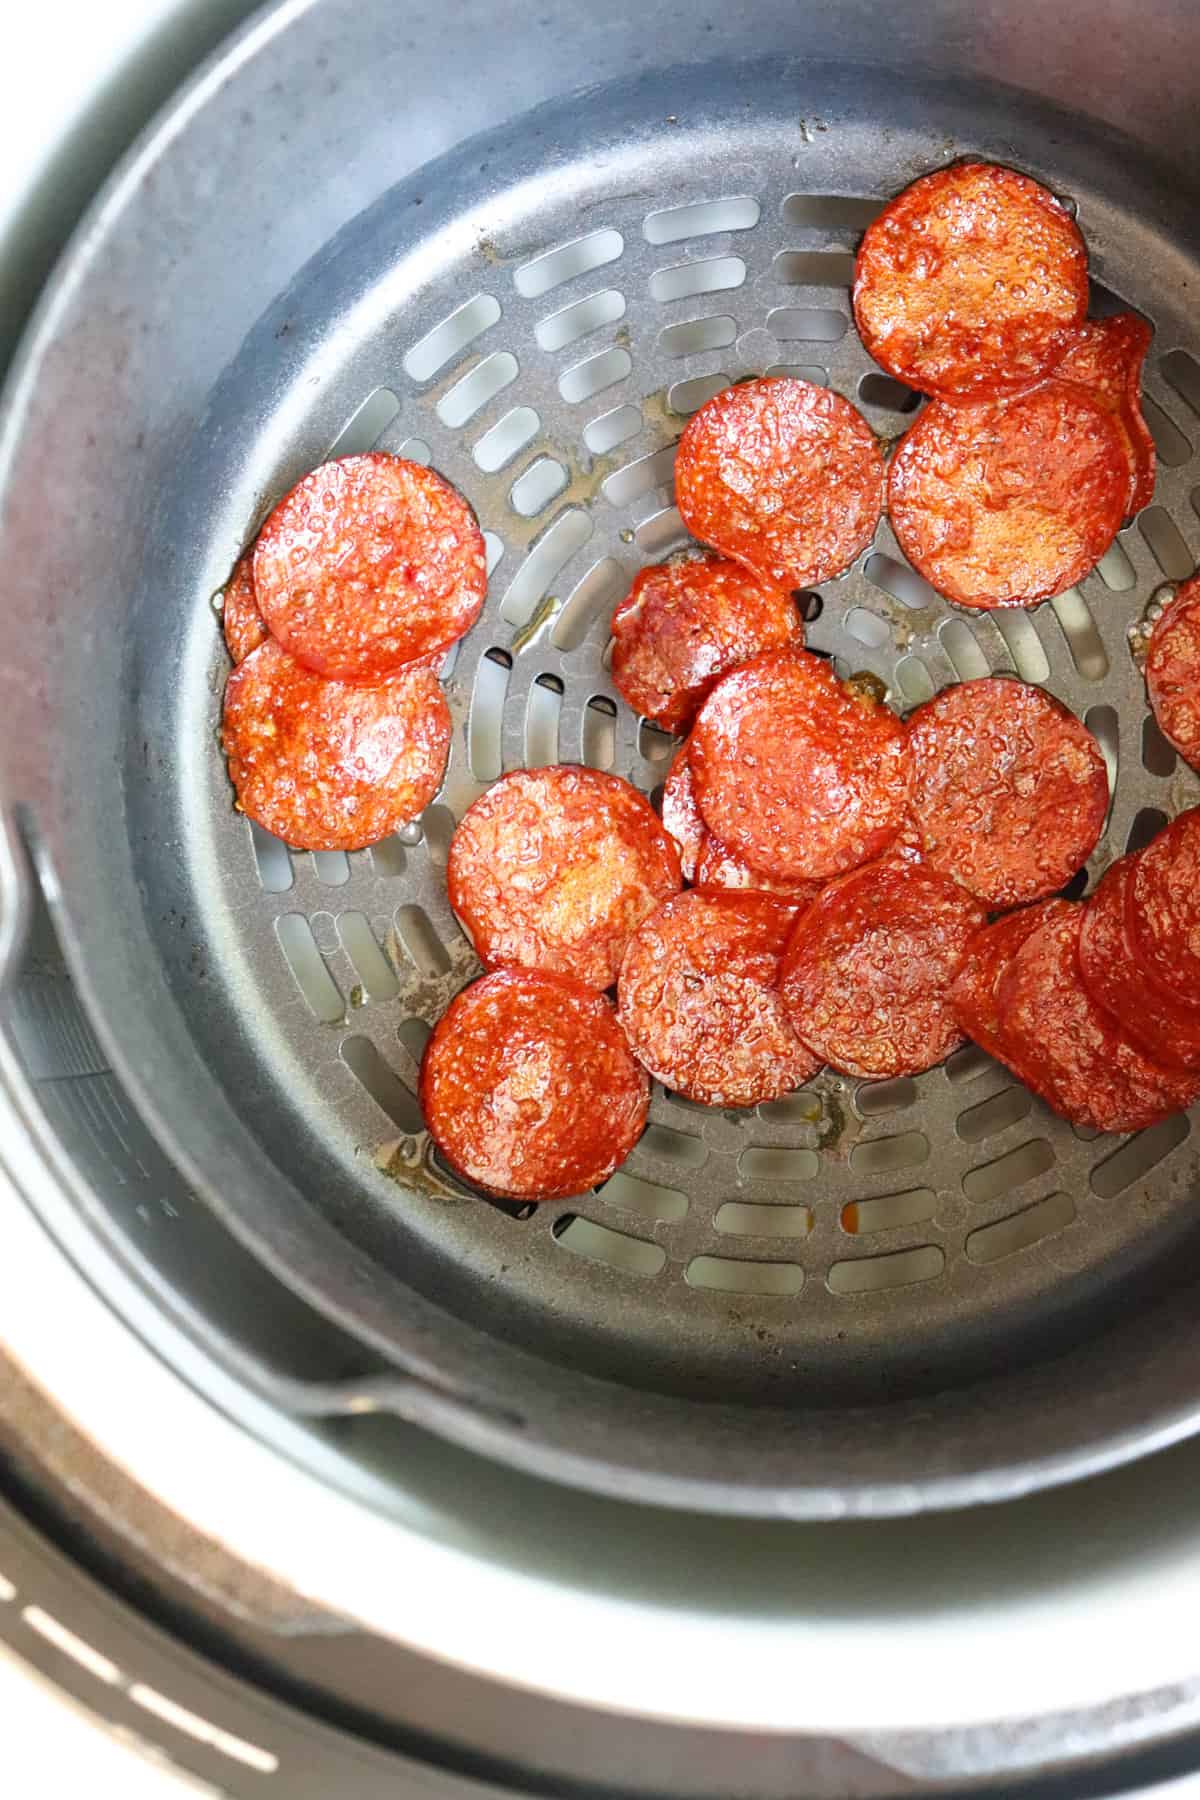 finished pepperoni in air fryer basket.